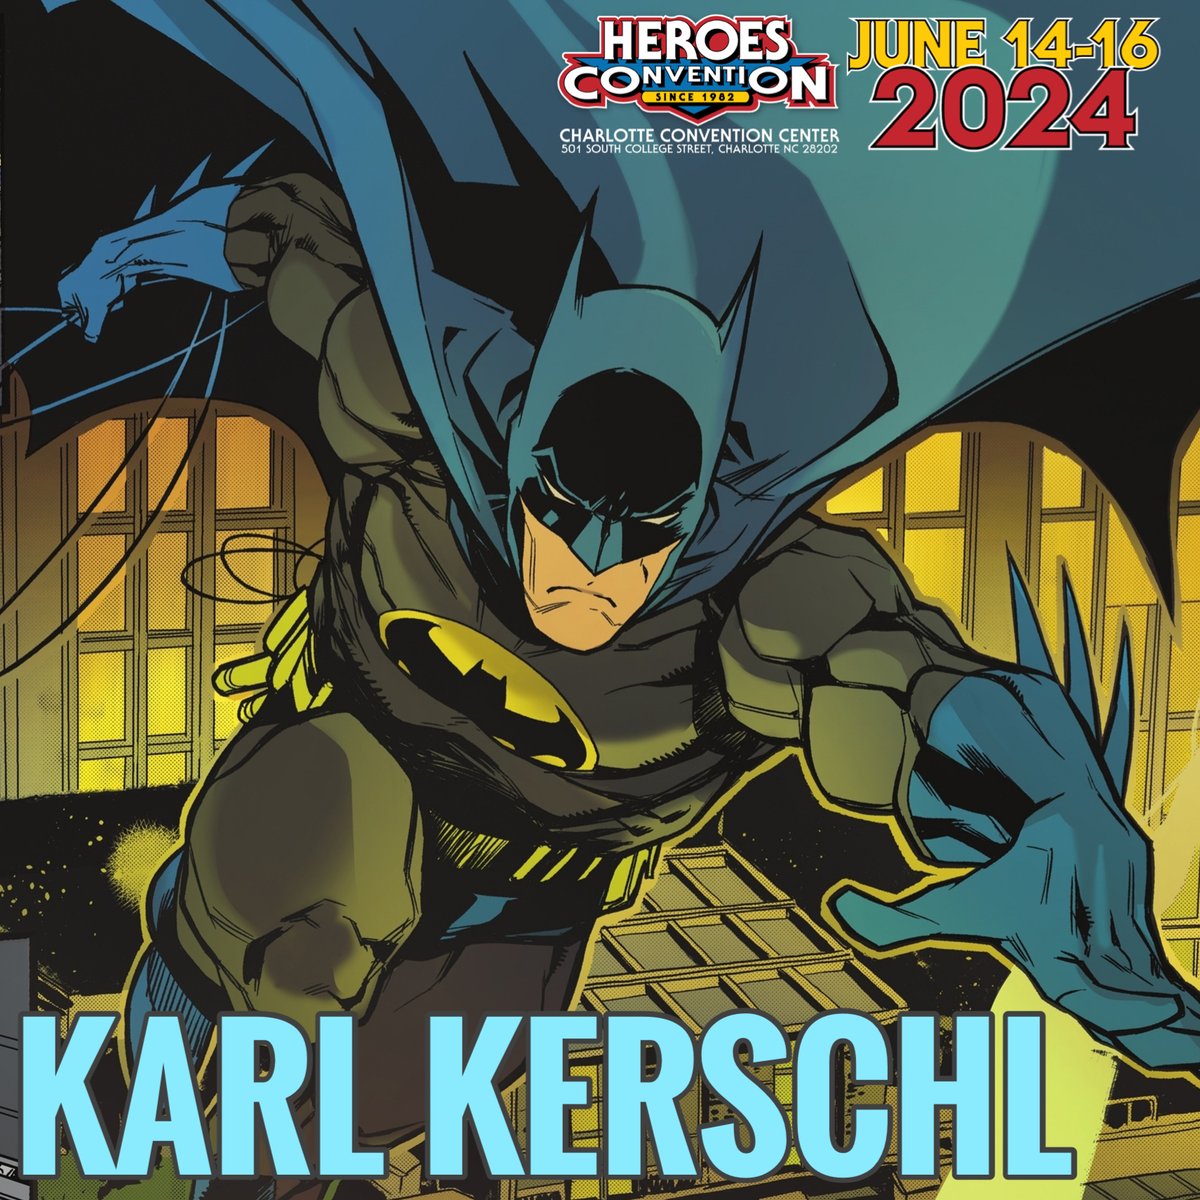 Eisner Award-winner KARL KERSCHL whose art adorns Teen Titans: Year One, ISOLA, Gotham Academy & Death Transit Tanager, will be at HeroesCon, June 14-16! #karlkerschl #gothamacademy #batman #heroescon Tickets: heroesonline.com/heroescon/tick… Featured Guest List: heroesonline.com/heroescon/feat…